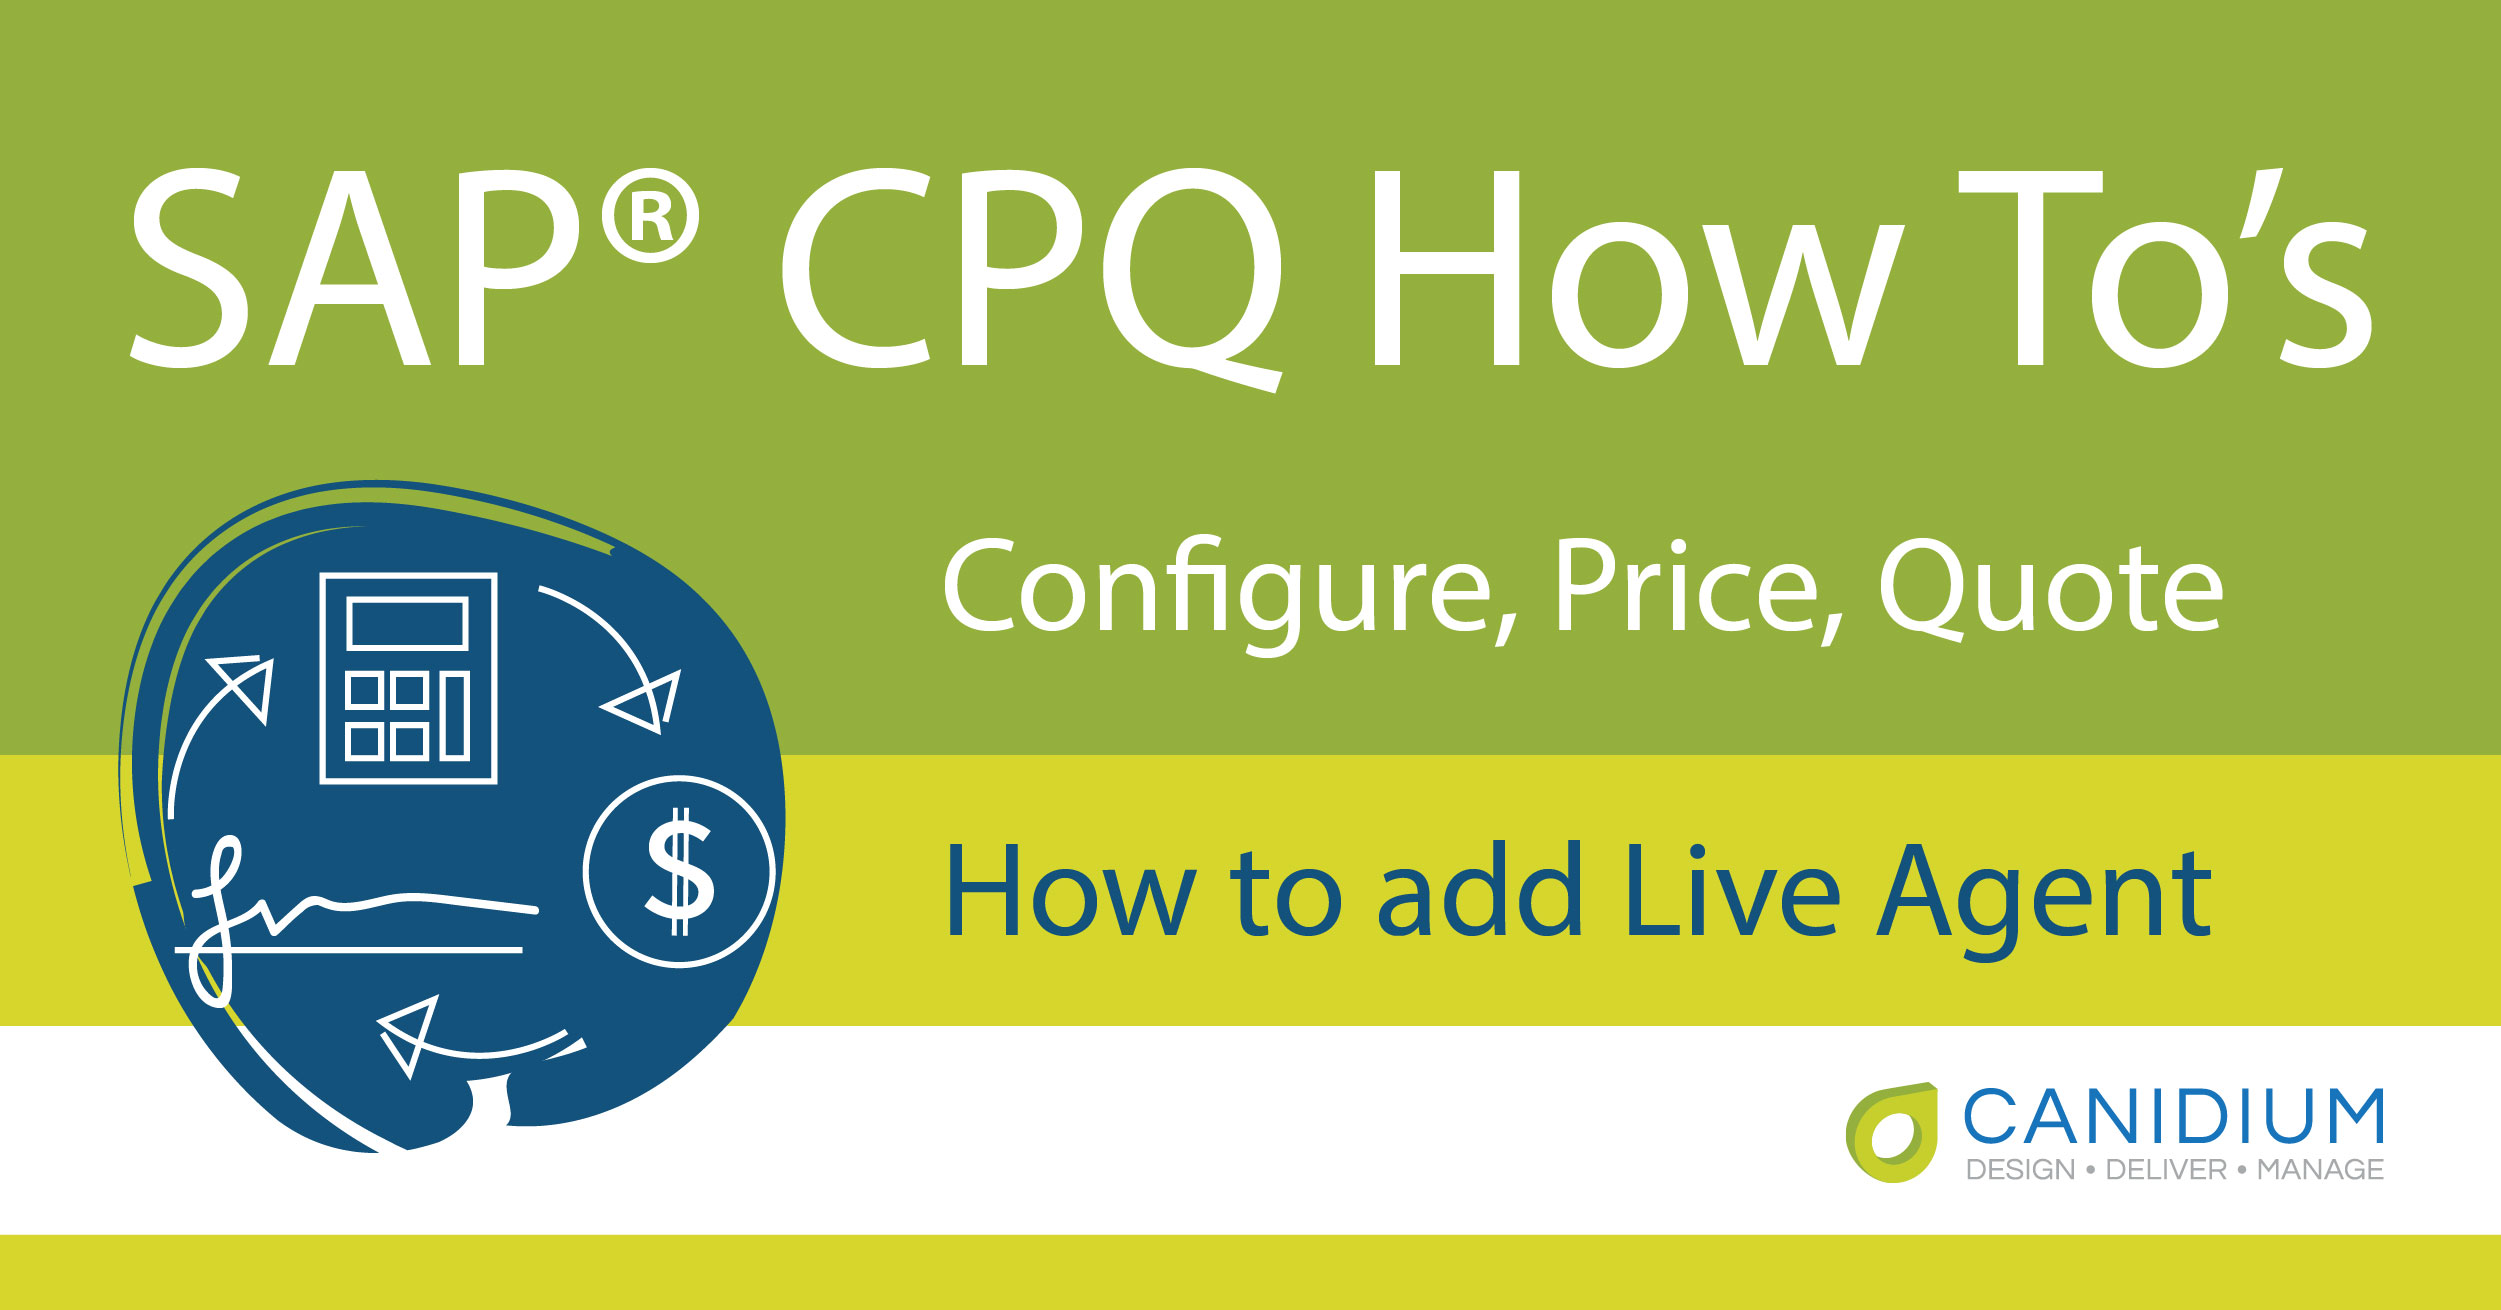 How to add Live Agent to SAP® CPQ